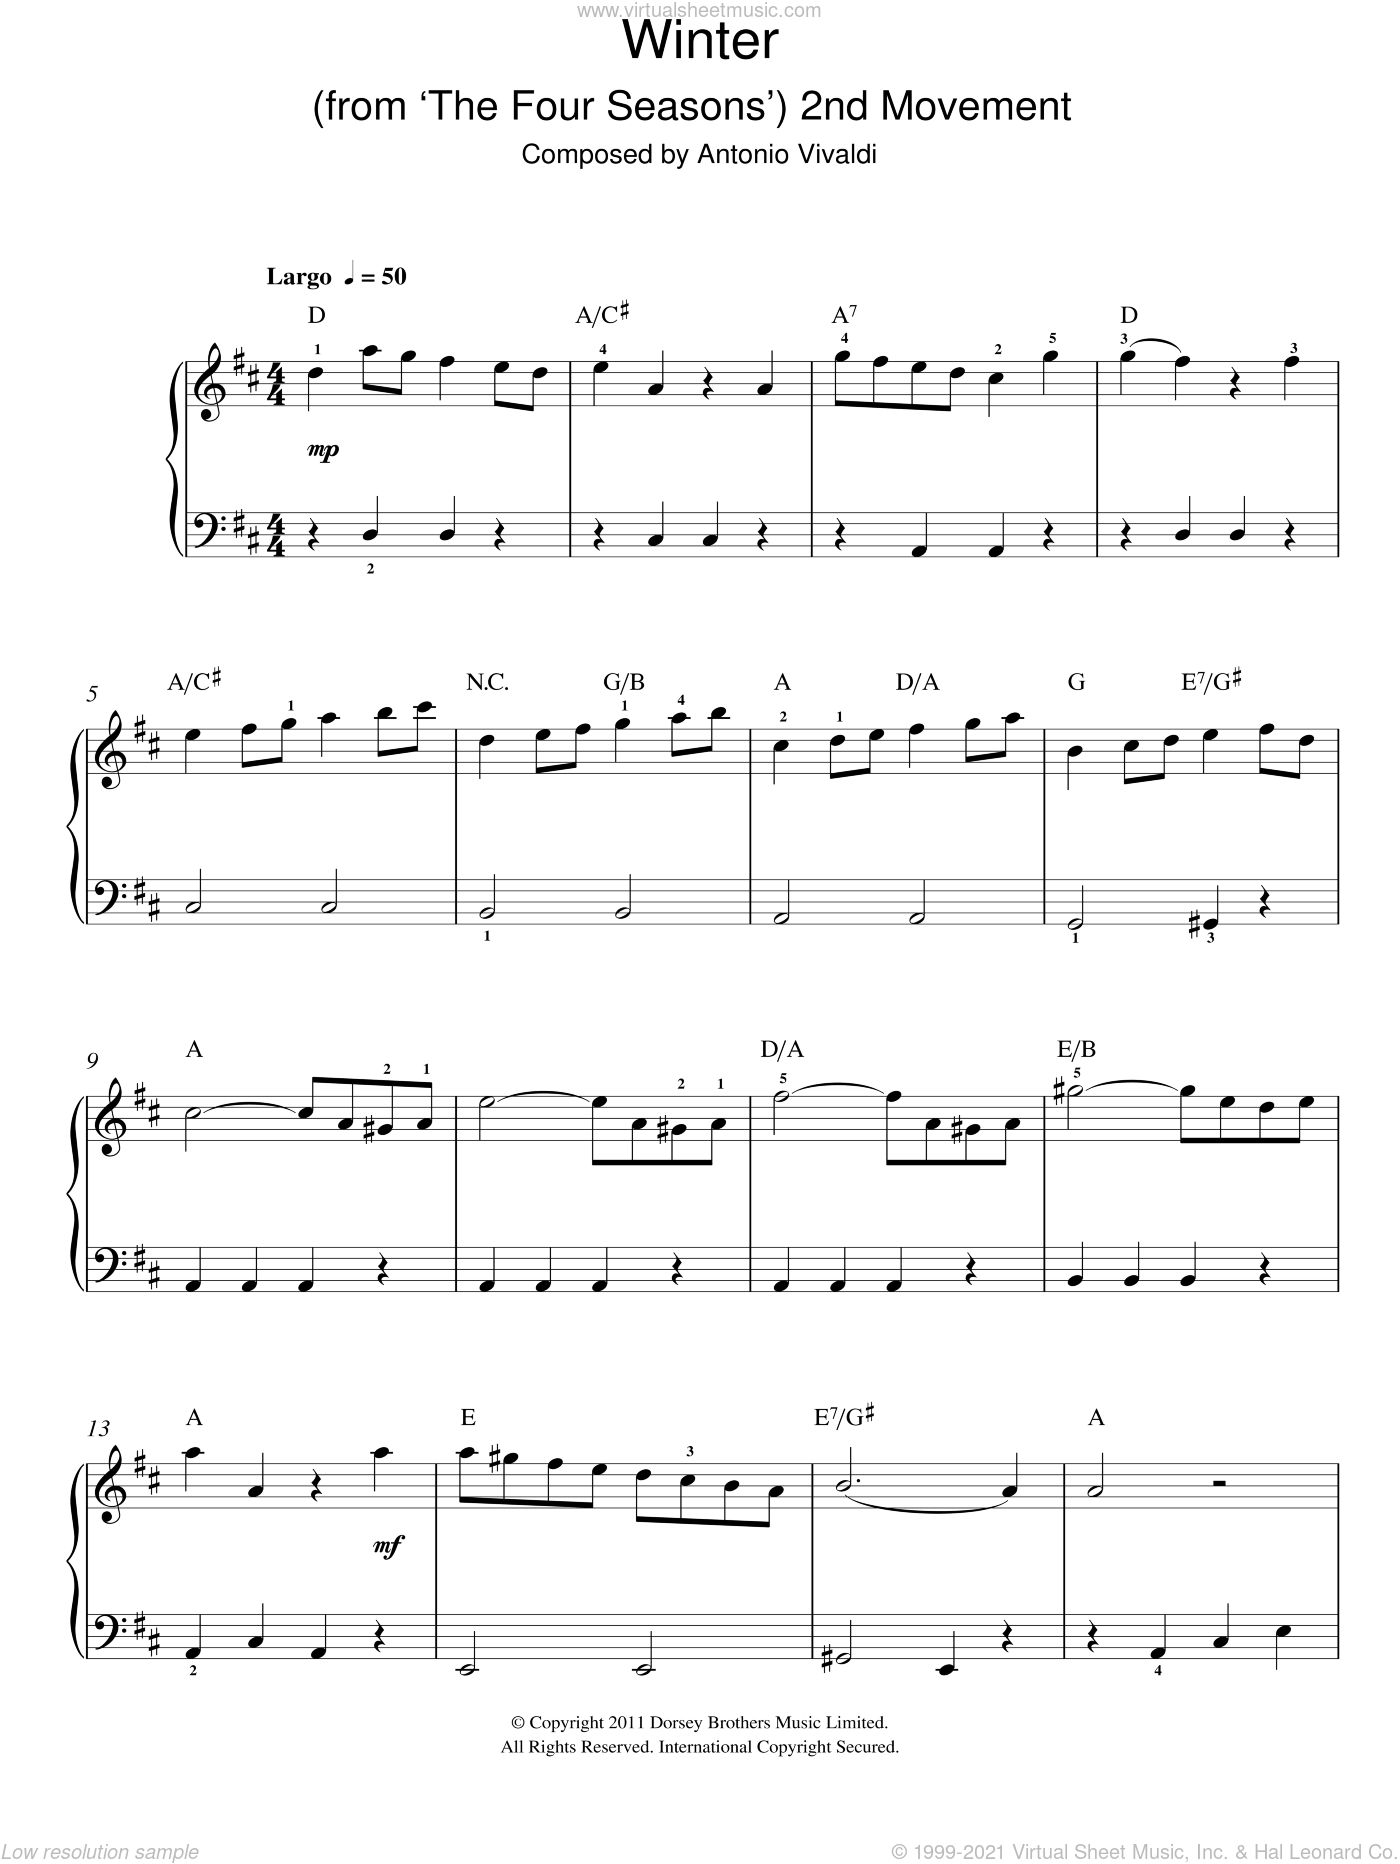 Download Vivaldi - Winter (from The Four Seasons), (easy) sheet music for piano solo